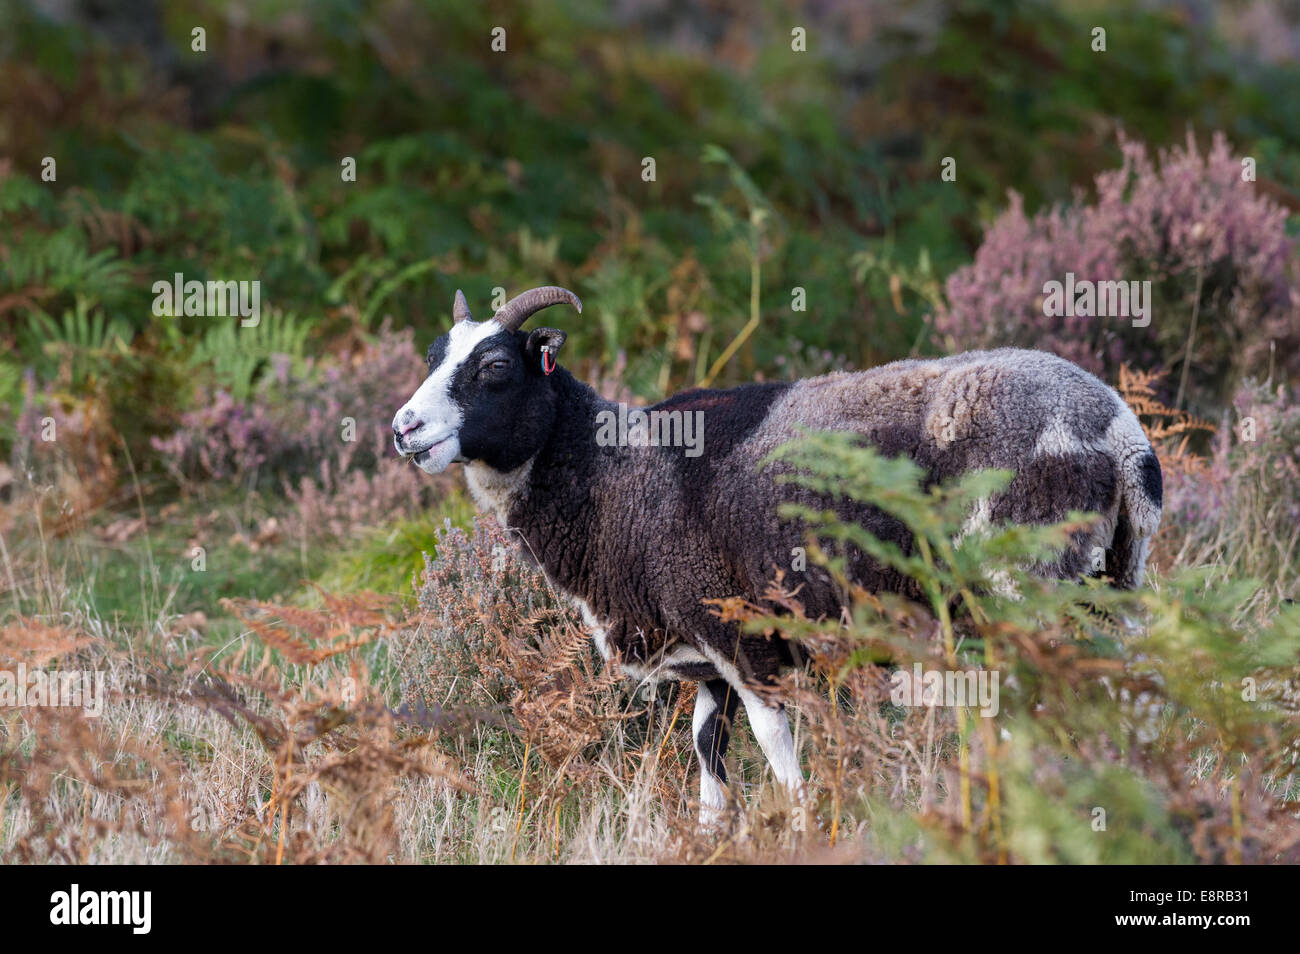 The Jacob Sheep which is an ancient breed of horned sheep being introduced into heathland  to maintain this natural habitat. Stock Photo